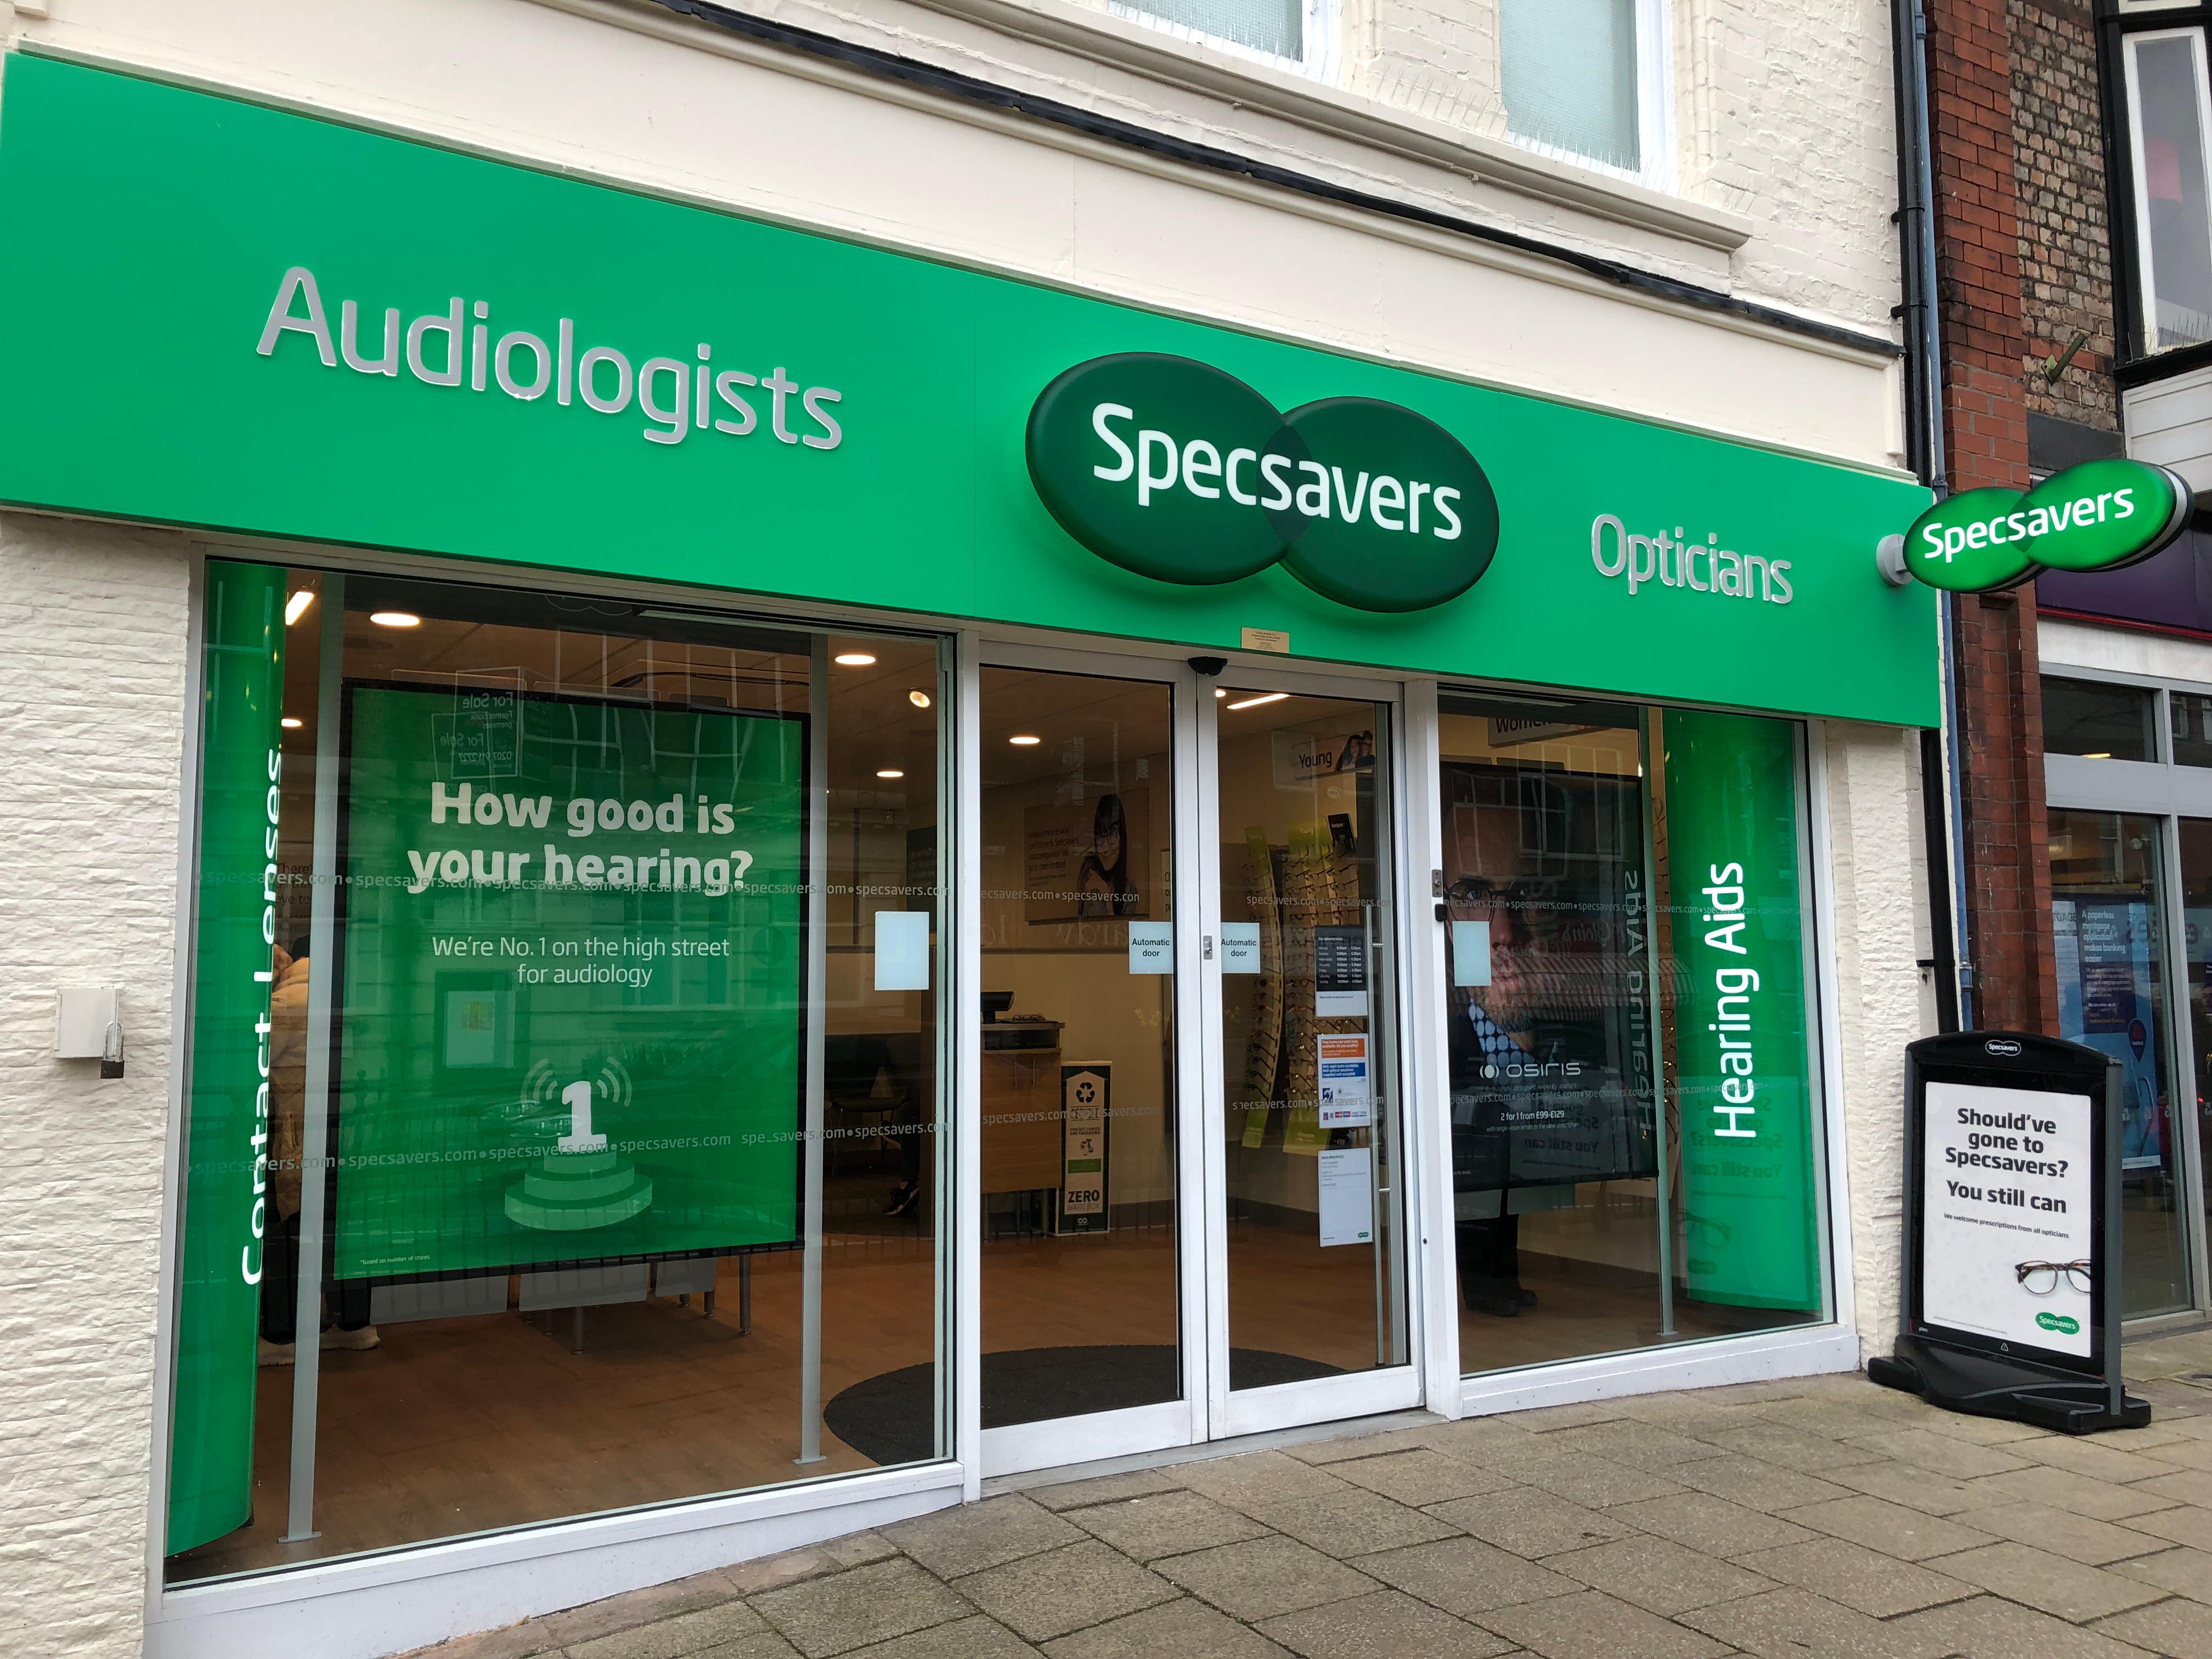 Images Specsavers Opticians and Audiologists - Urmston